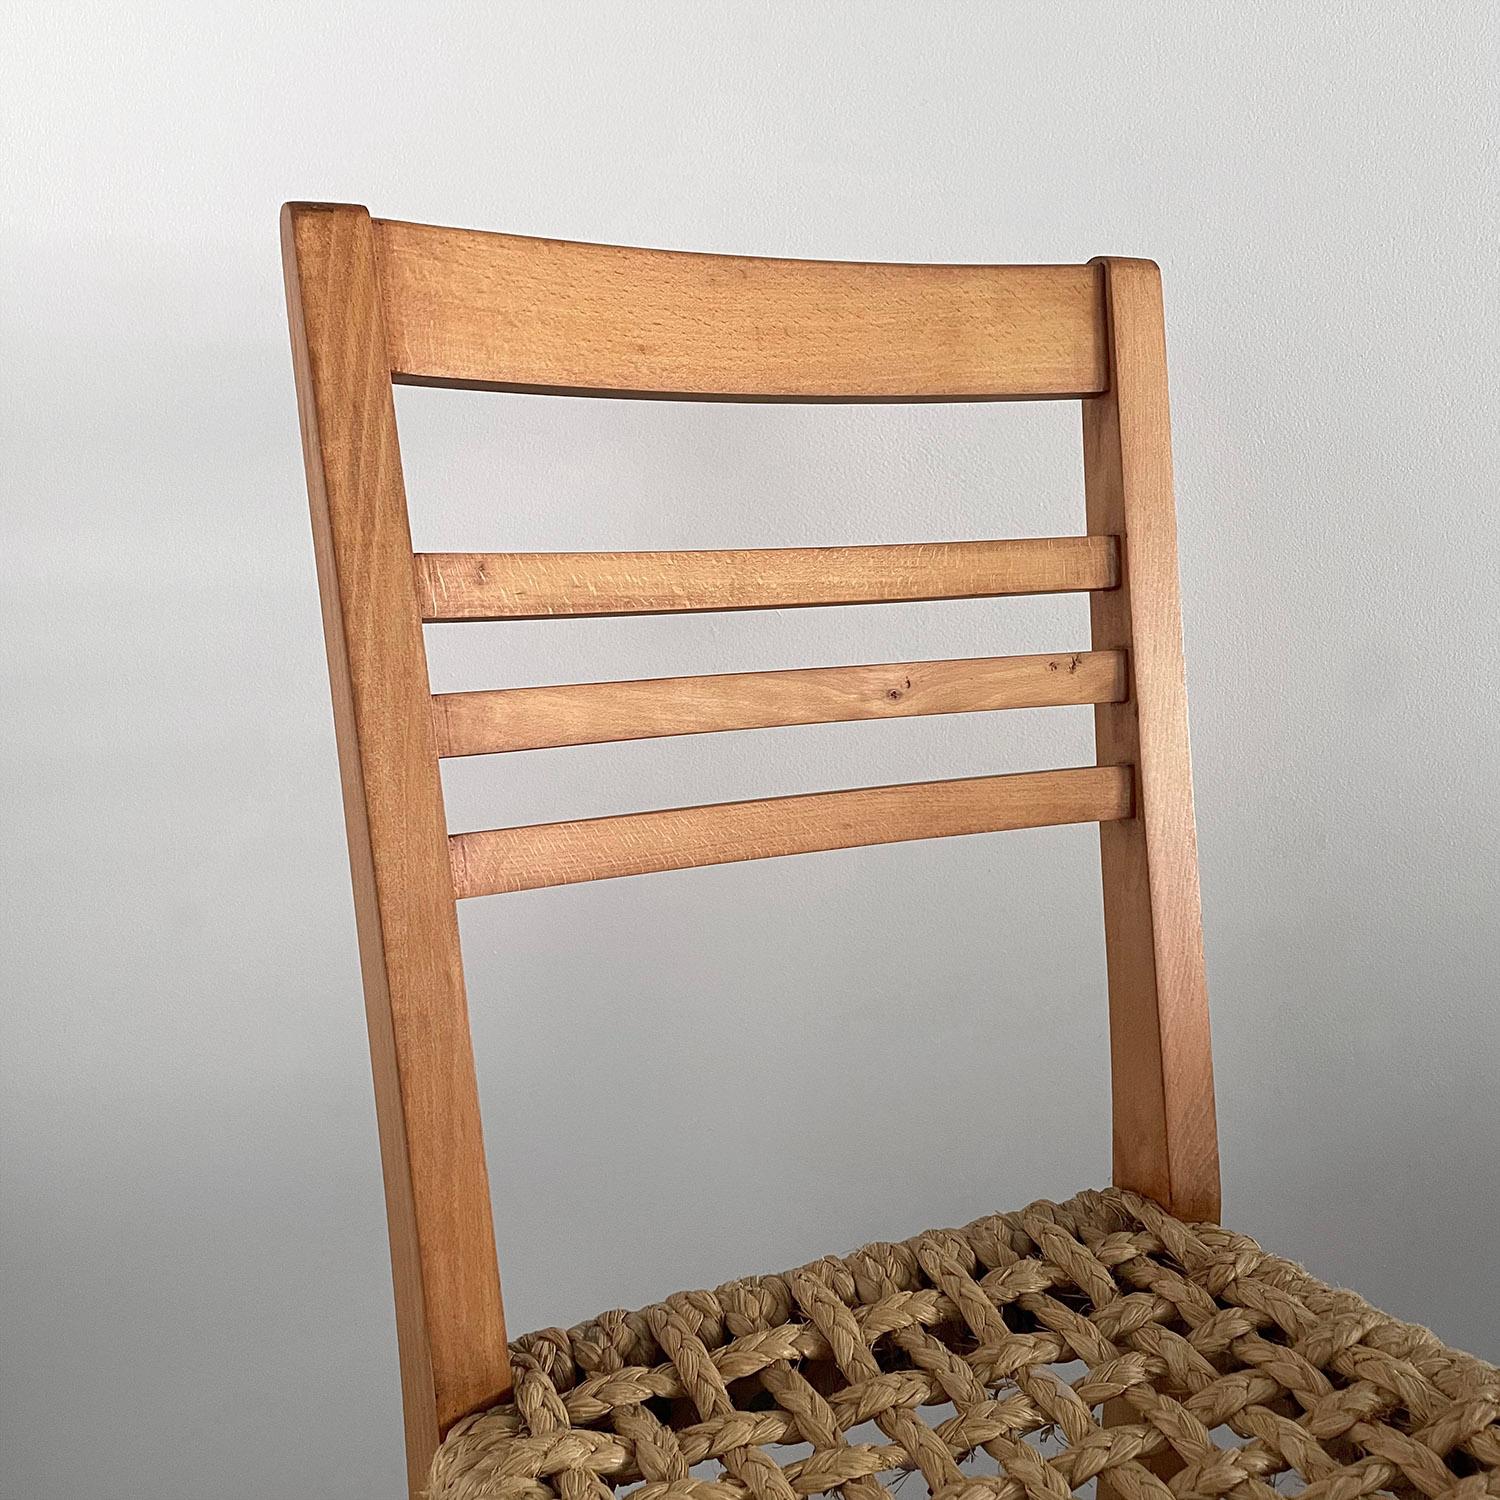 Audoux Minet French Oak & Rope Side Chair  For Sale 4